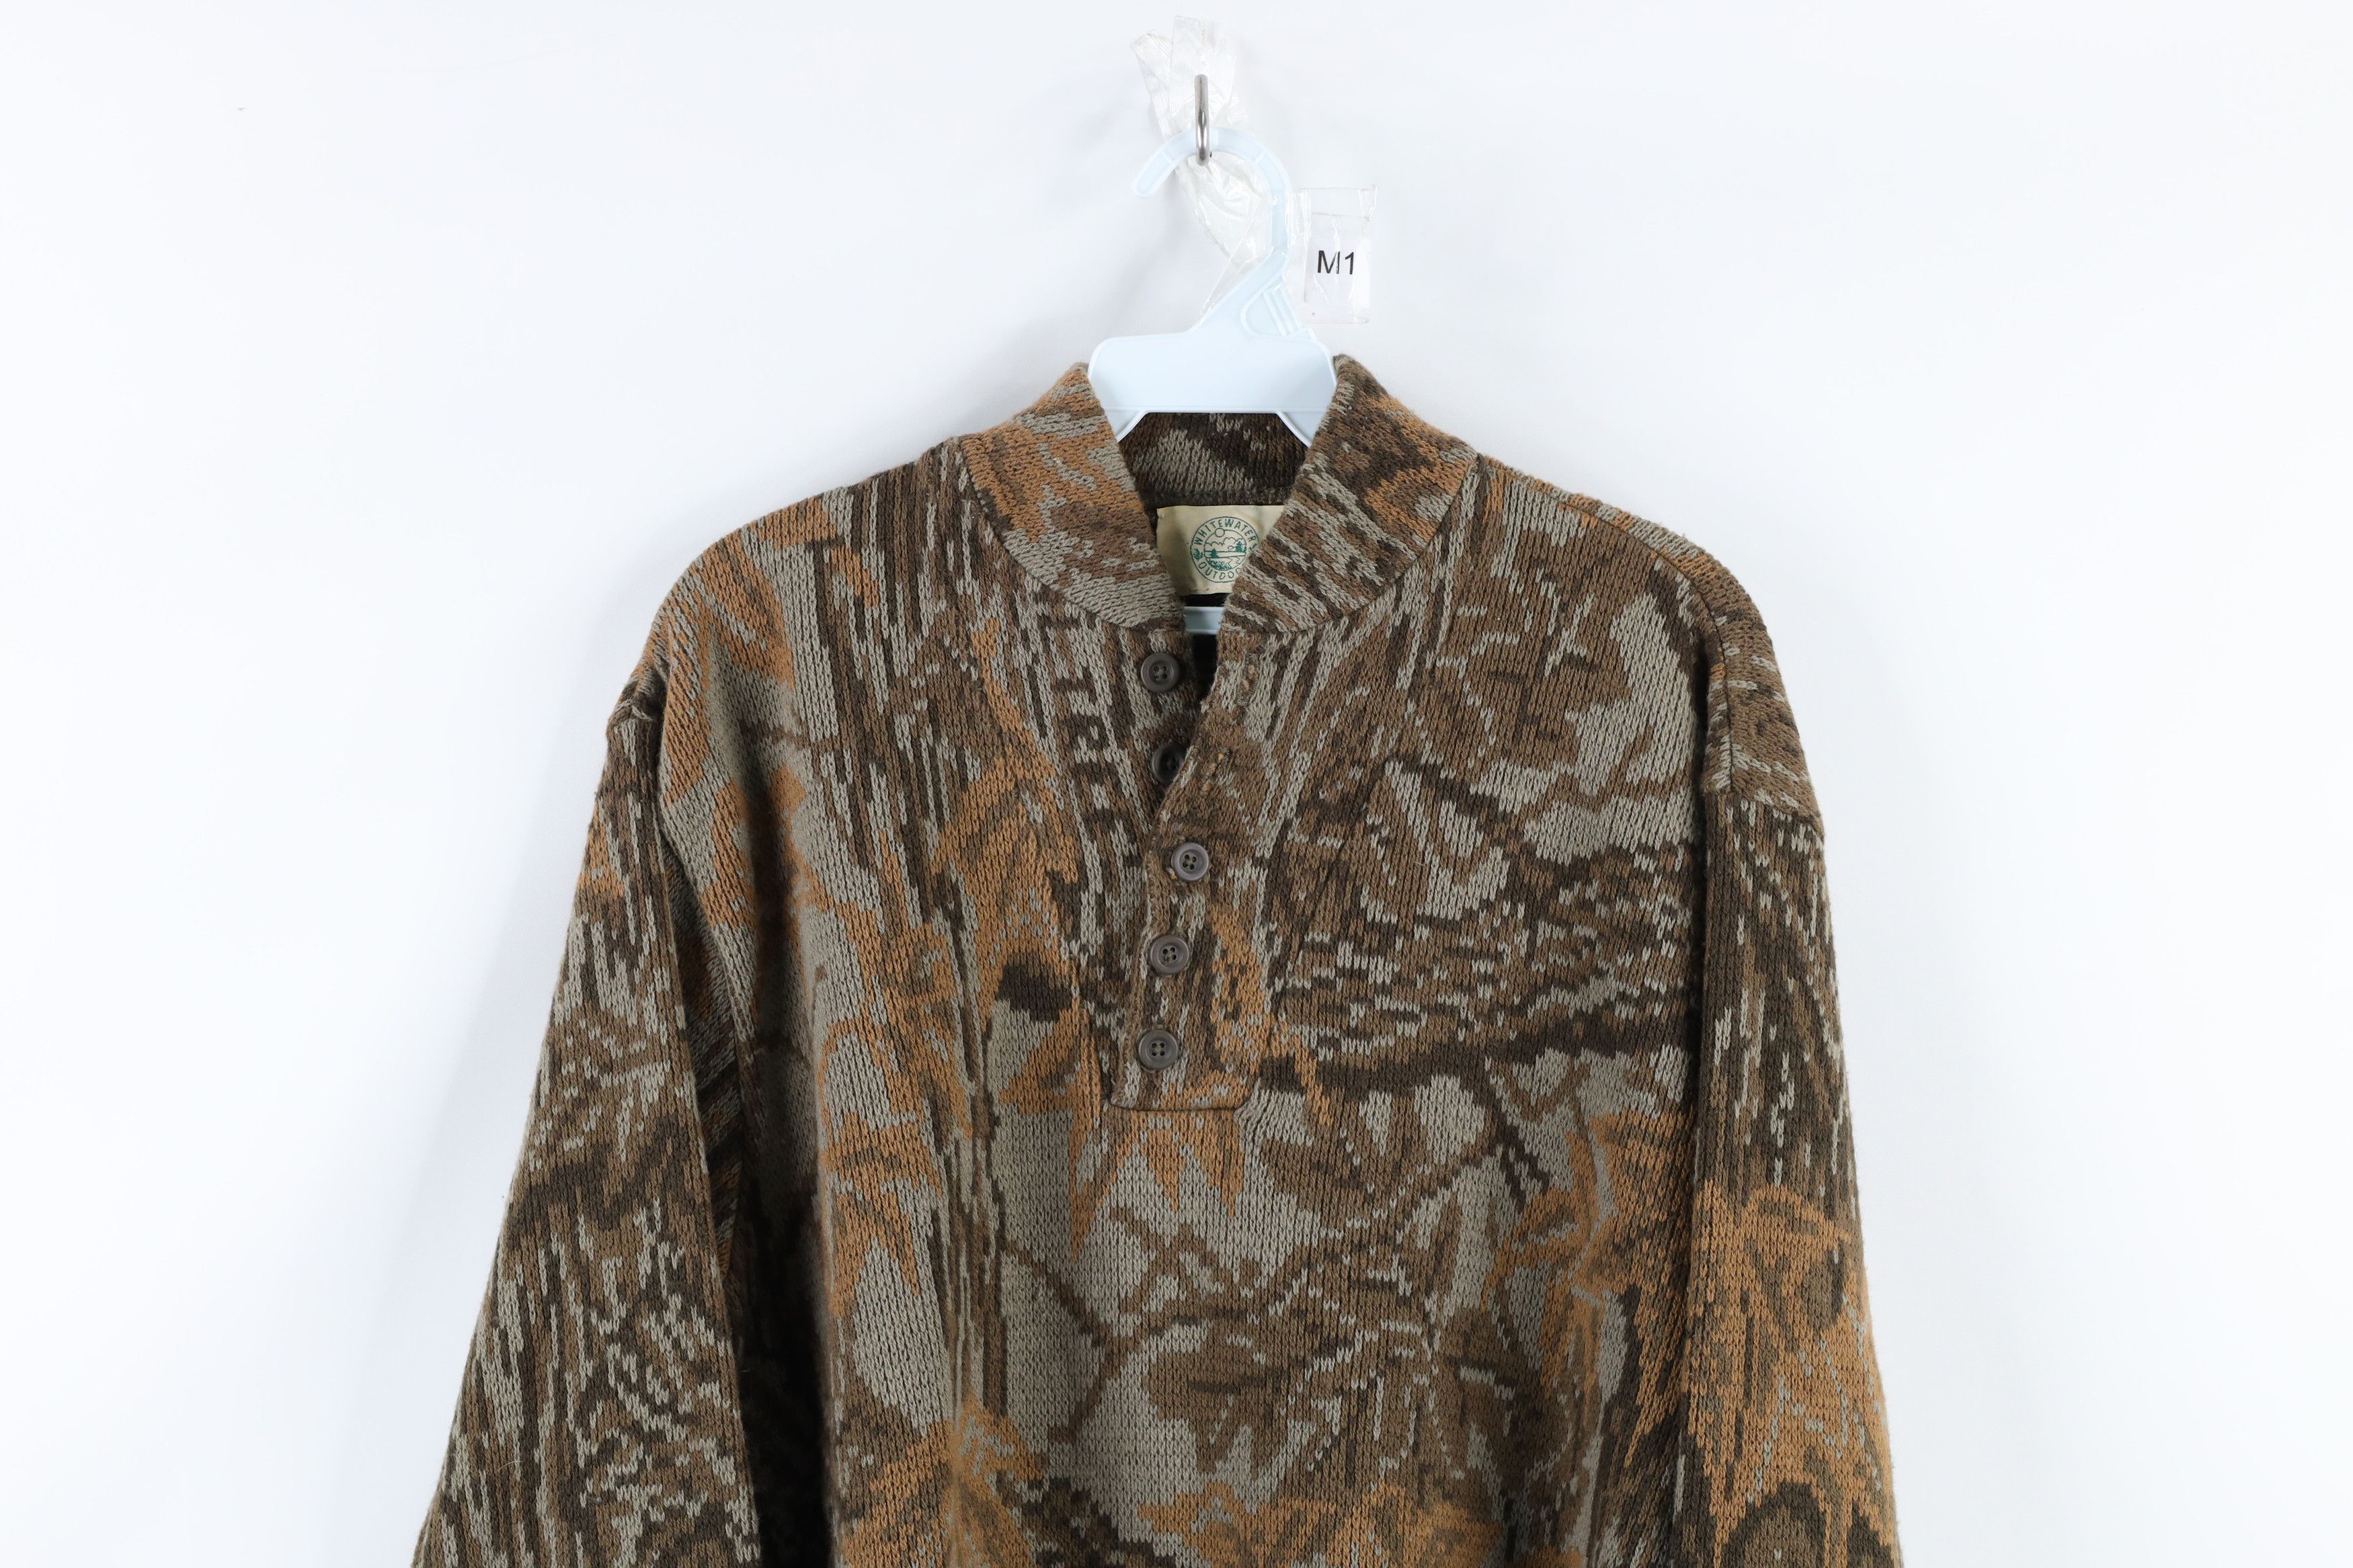 Vintage Vintage 90s Streetwear Realtree Camouflage Henley Sweater Size US M / EU 48-50 / 2 - 2 Preview